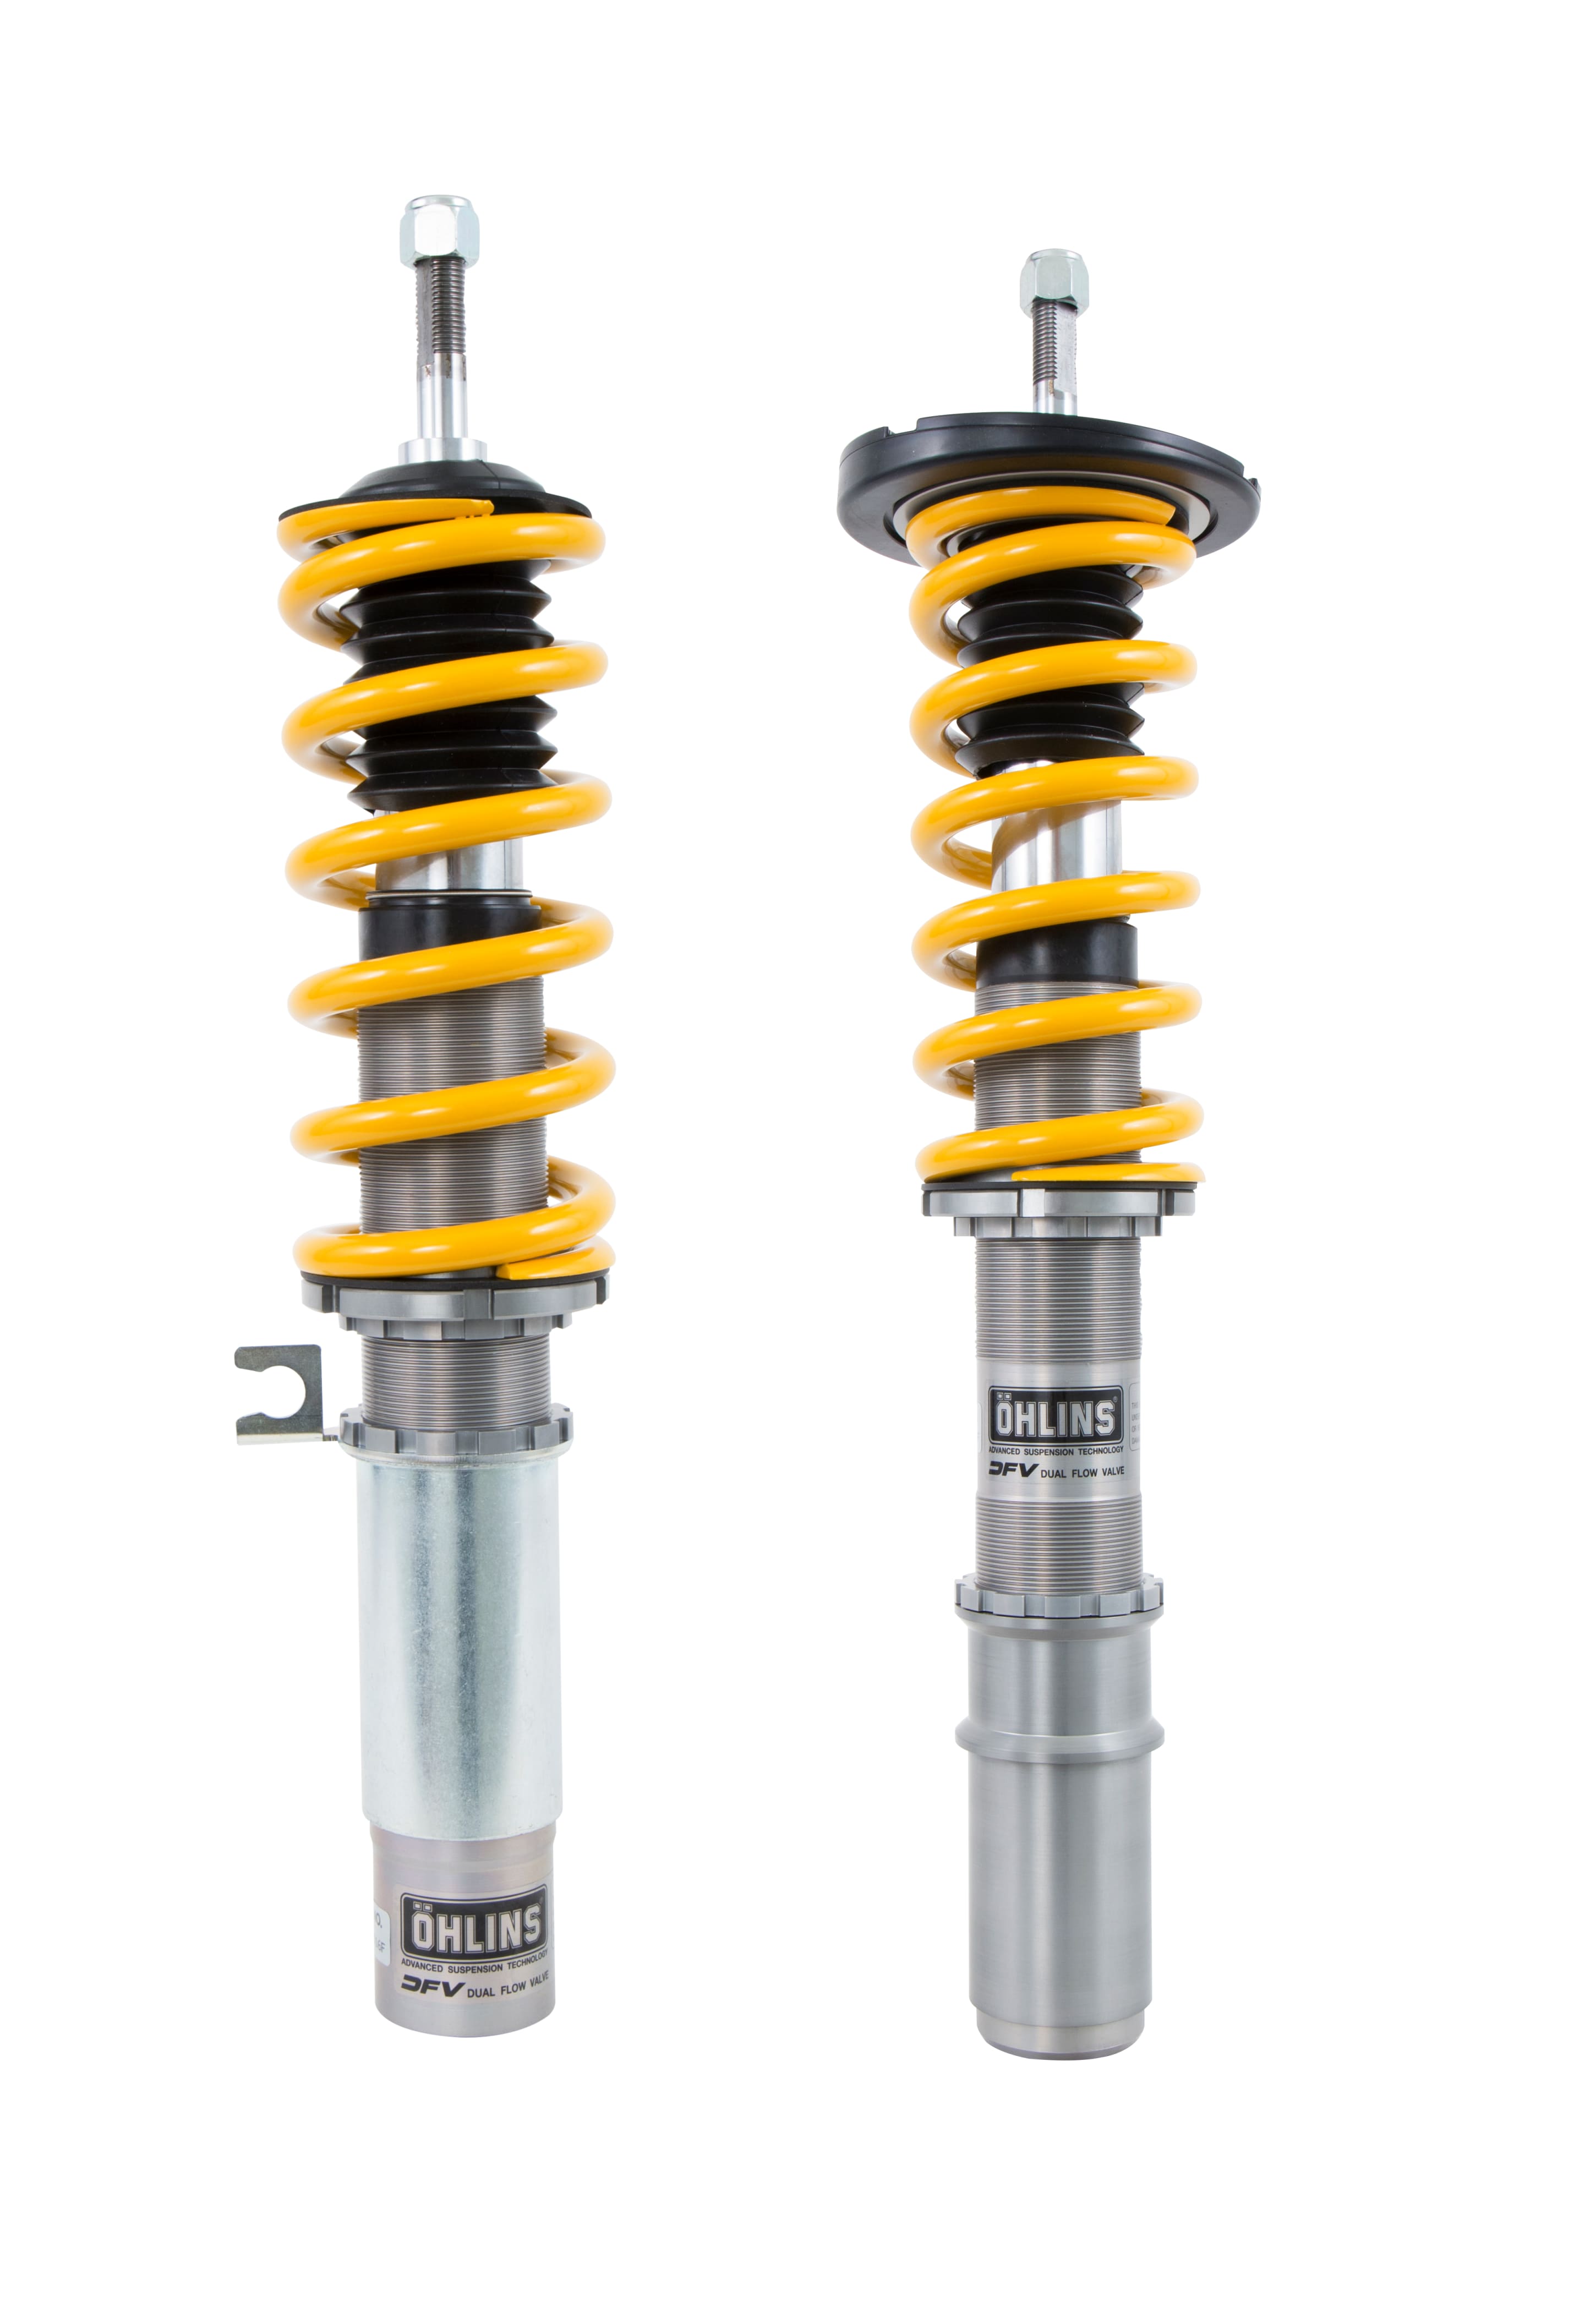 OHLINS POS MR80S1 Coilover Kit ROAD & TRACK for PORSCHE Boxster (986/987)/Cayman (987) 2004-2013 Photo-0 